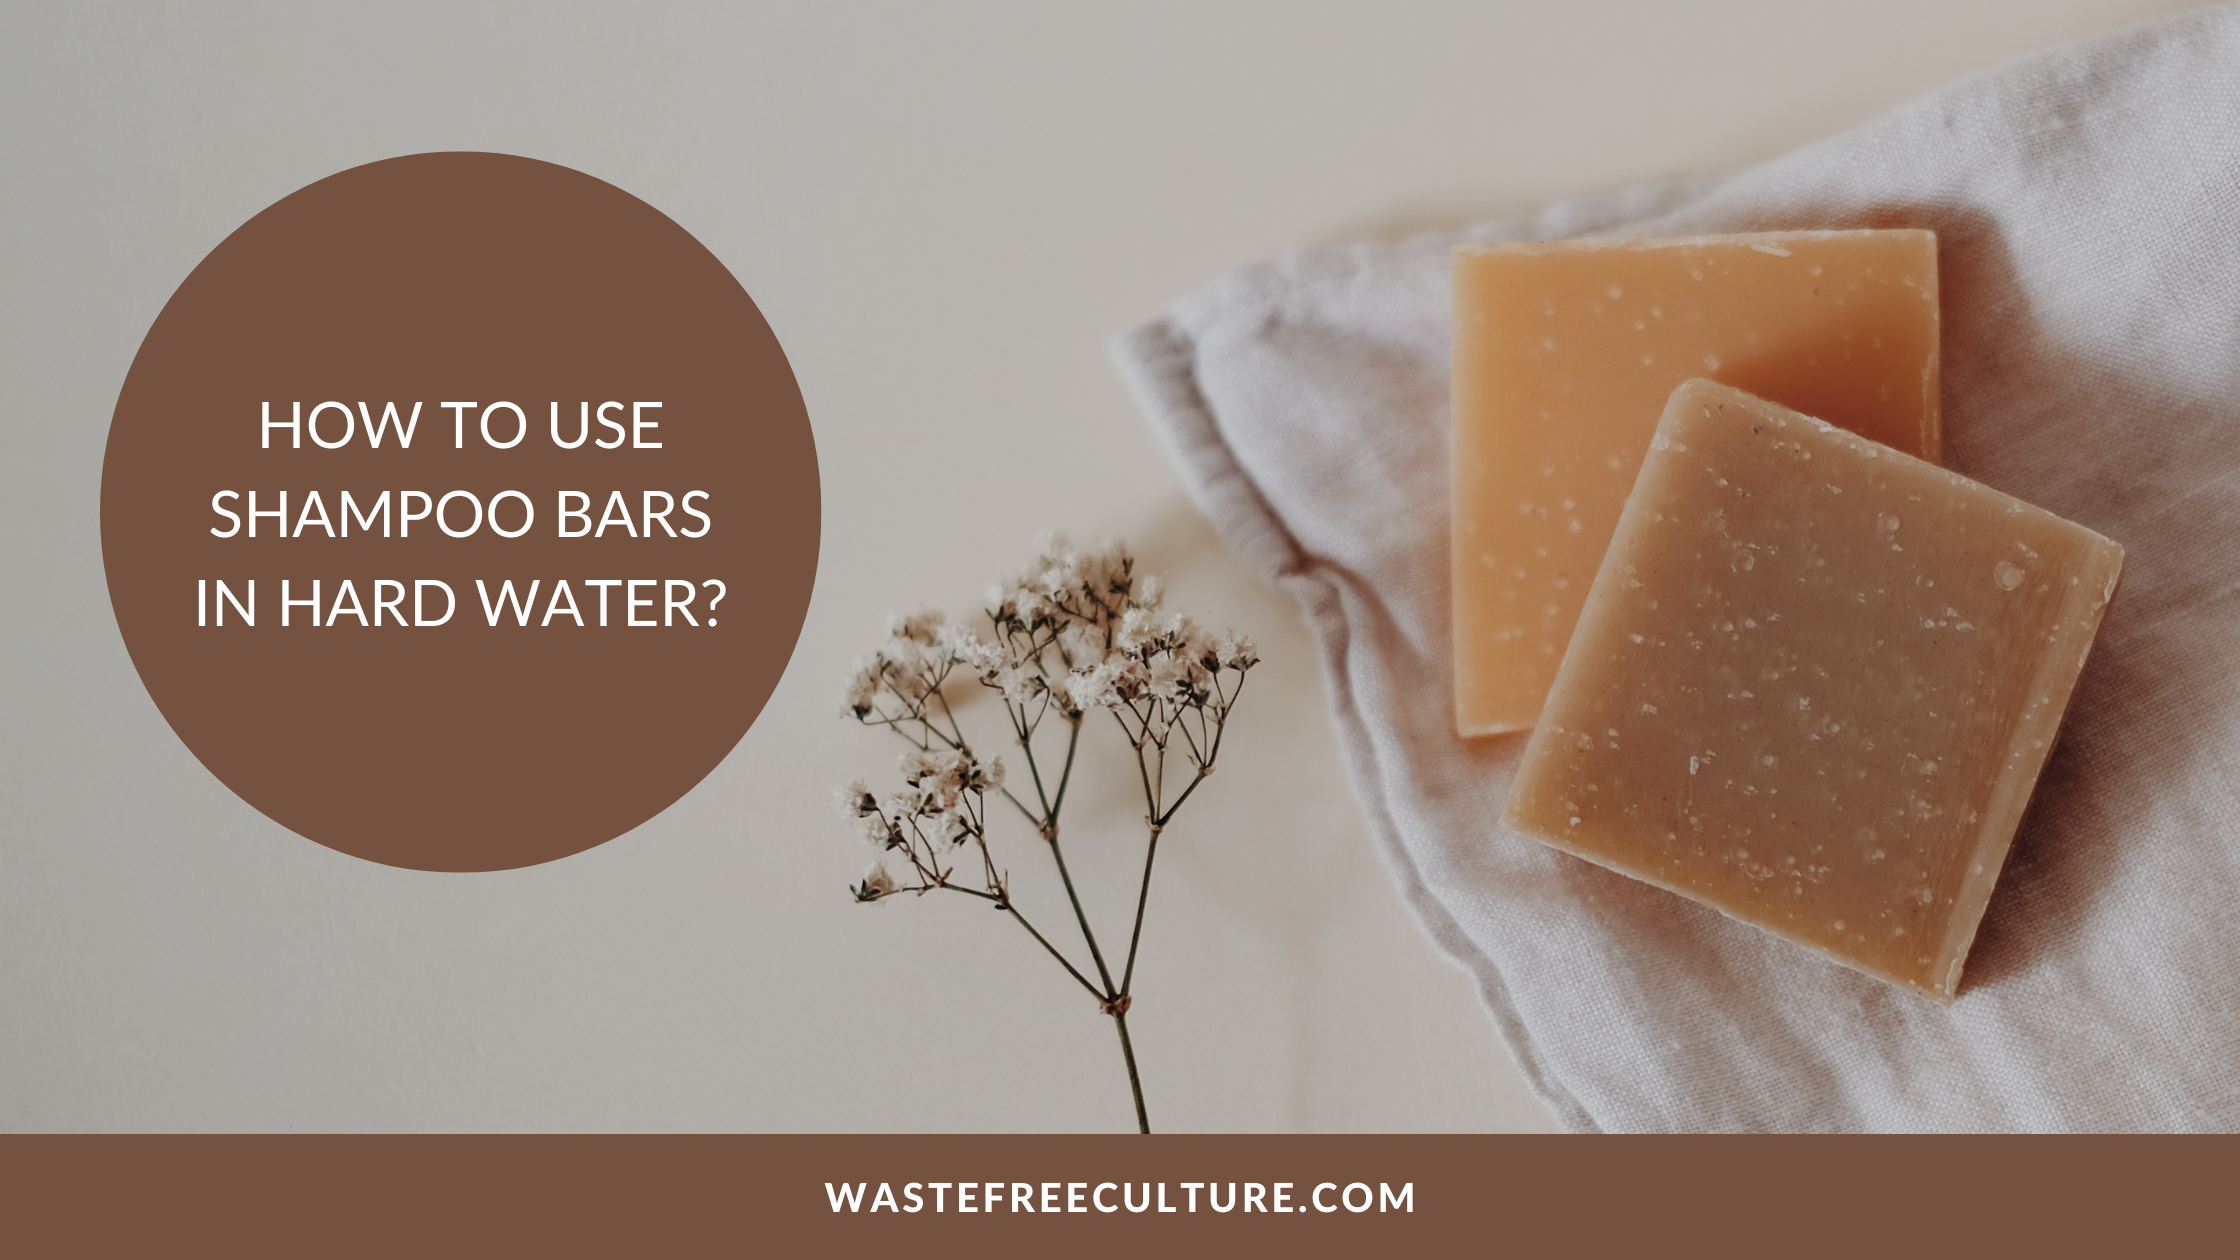 How to use shampoo bars in hard water?